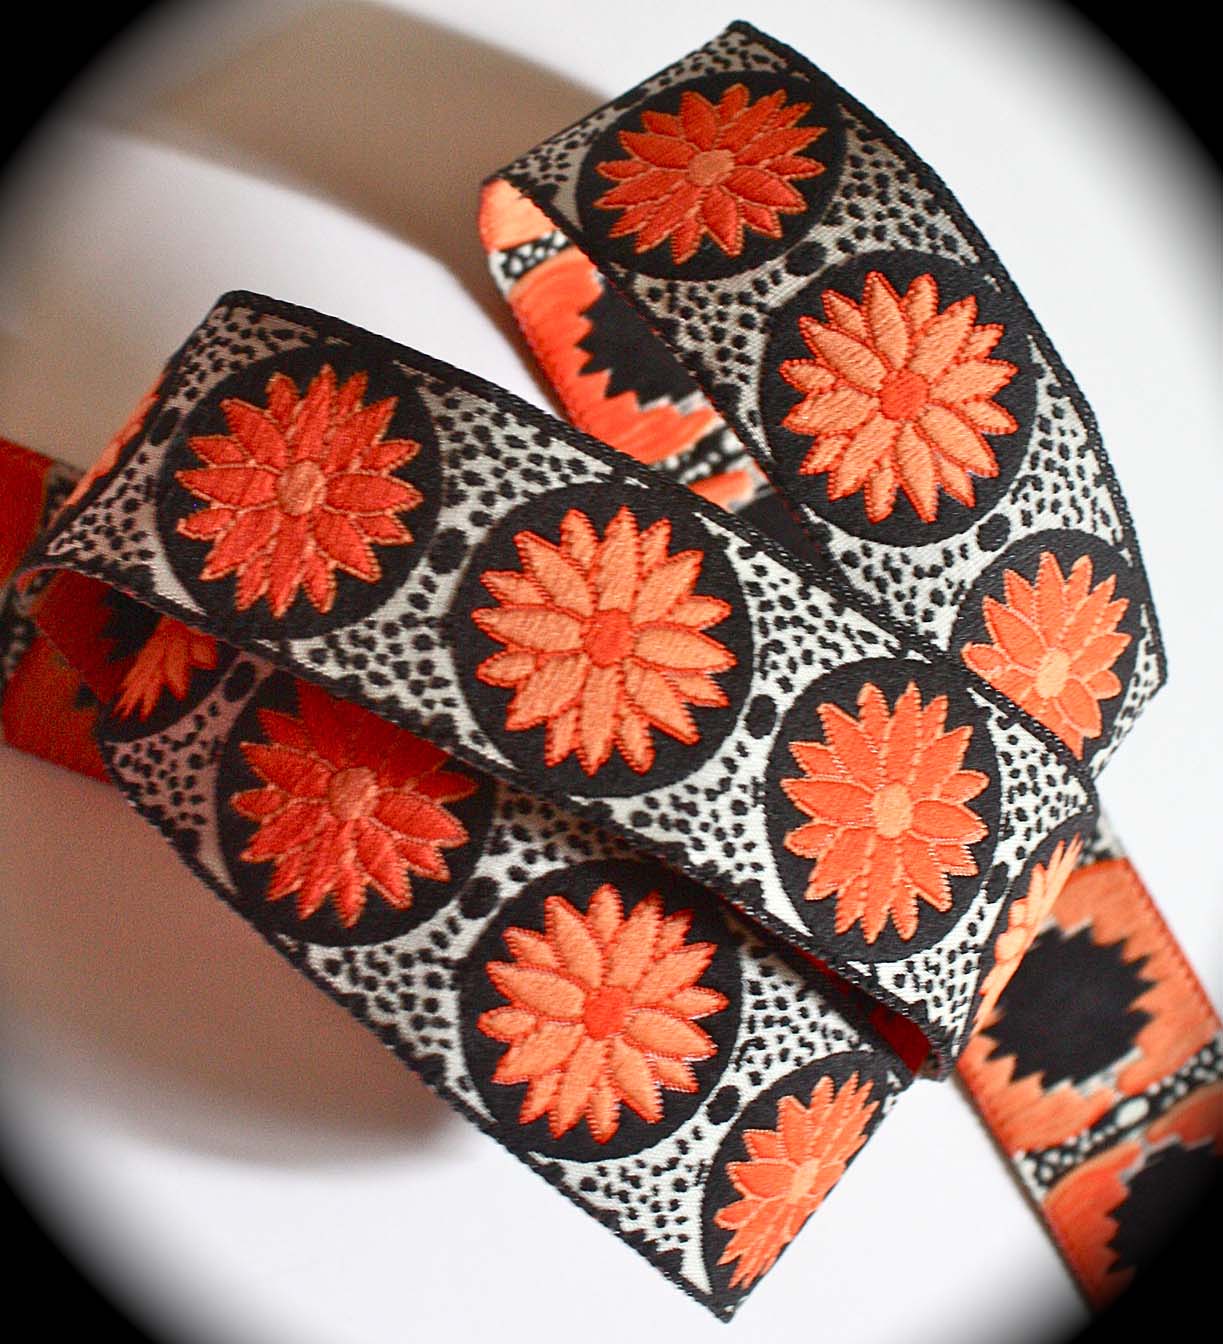 DAISY DOT FLOWER16 1"x 3 yards Orange, Coral and Black